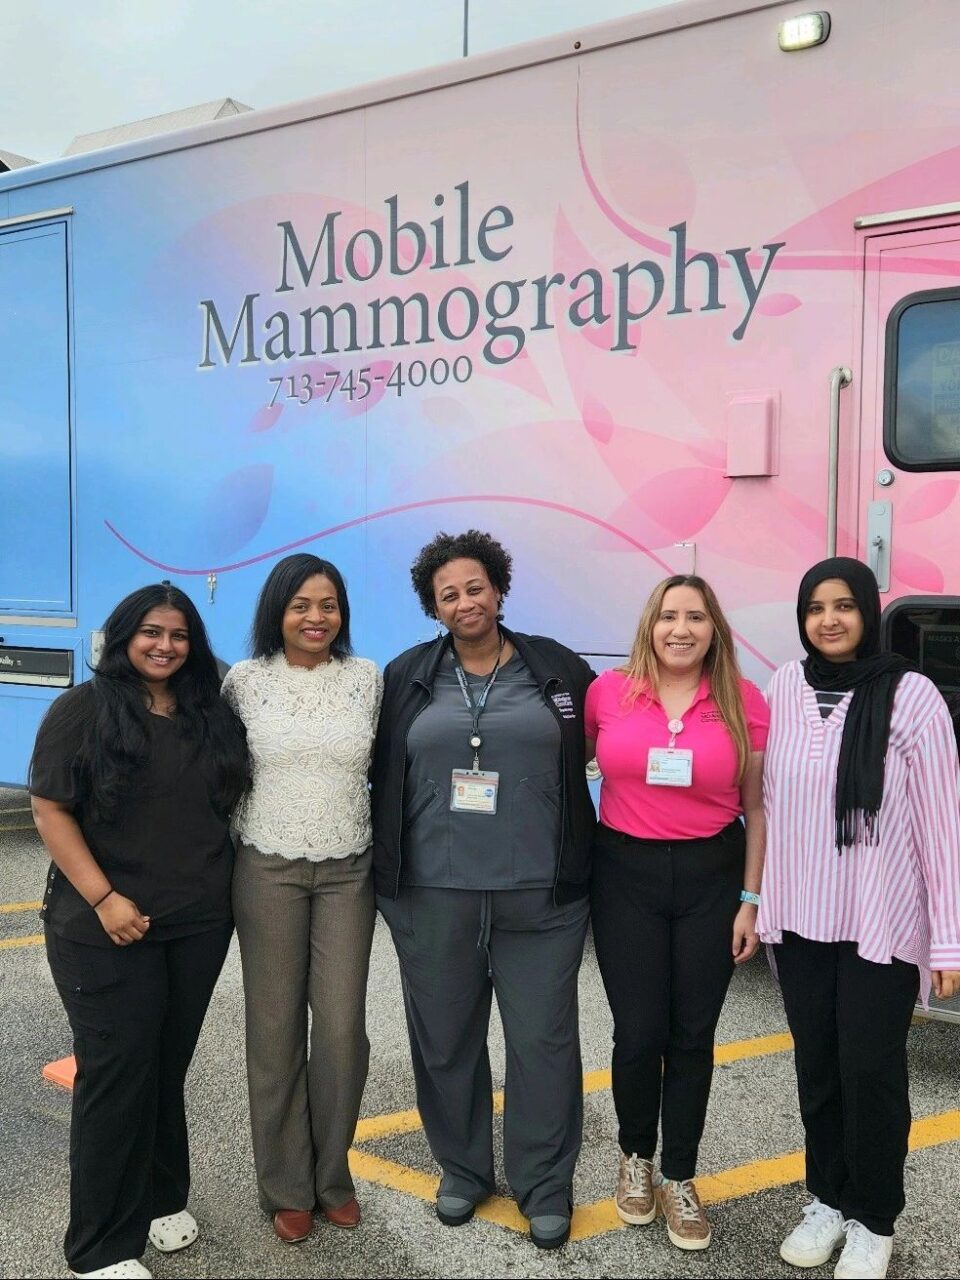 Melissa Codio Smith: MD Anderson Cancer Center’s Project Valet offers Free Mammograms to uninsured patients